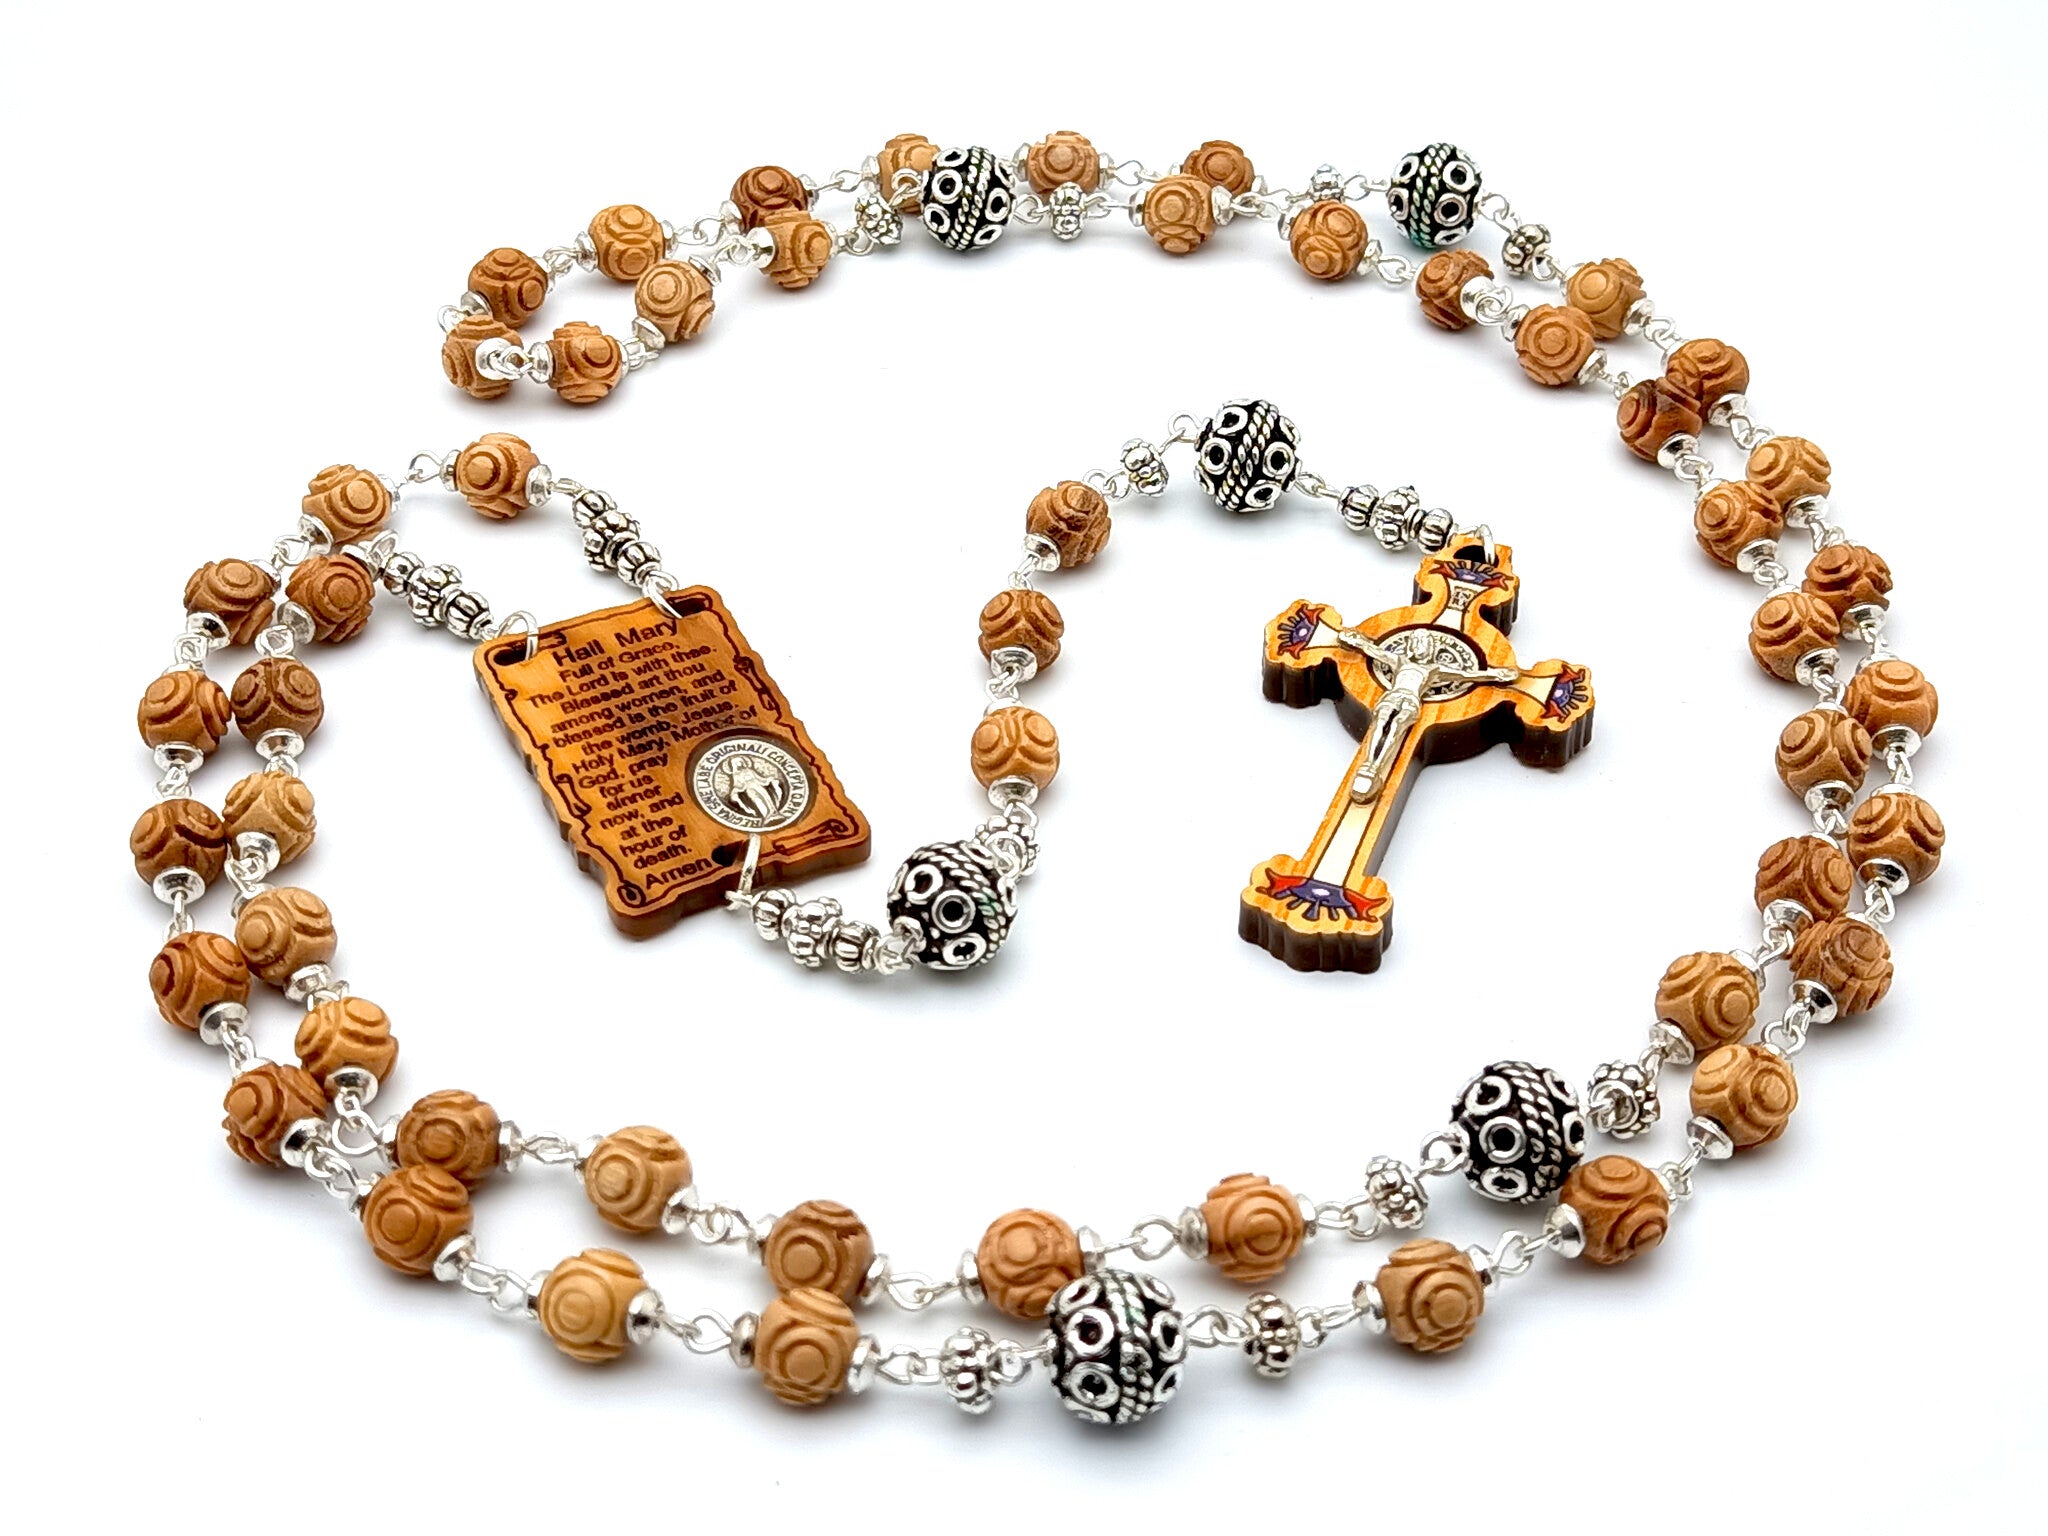 Wooden Rosaries – Unique Rosary Beads